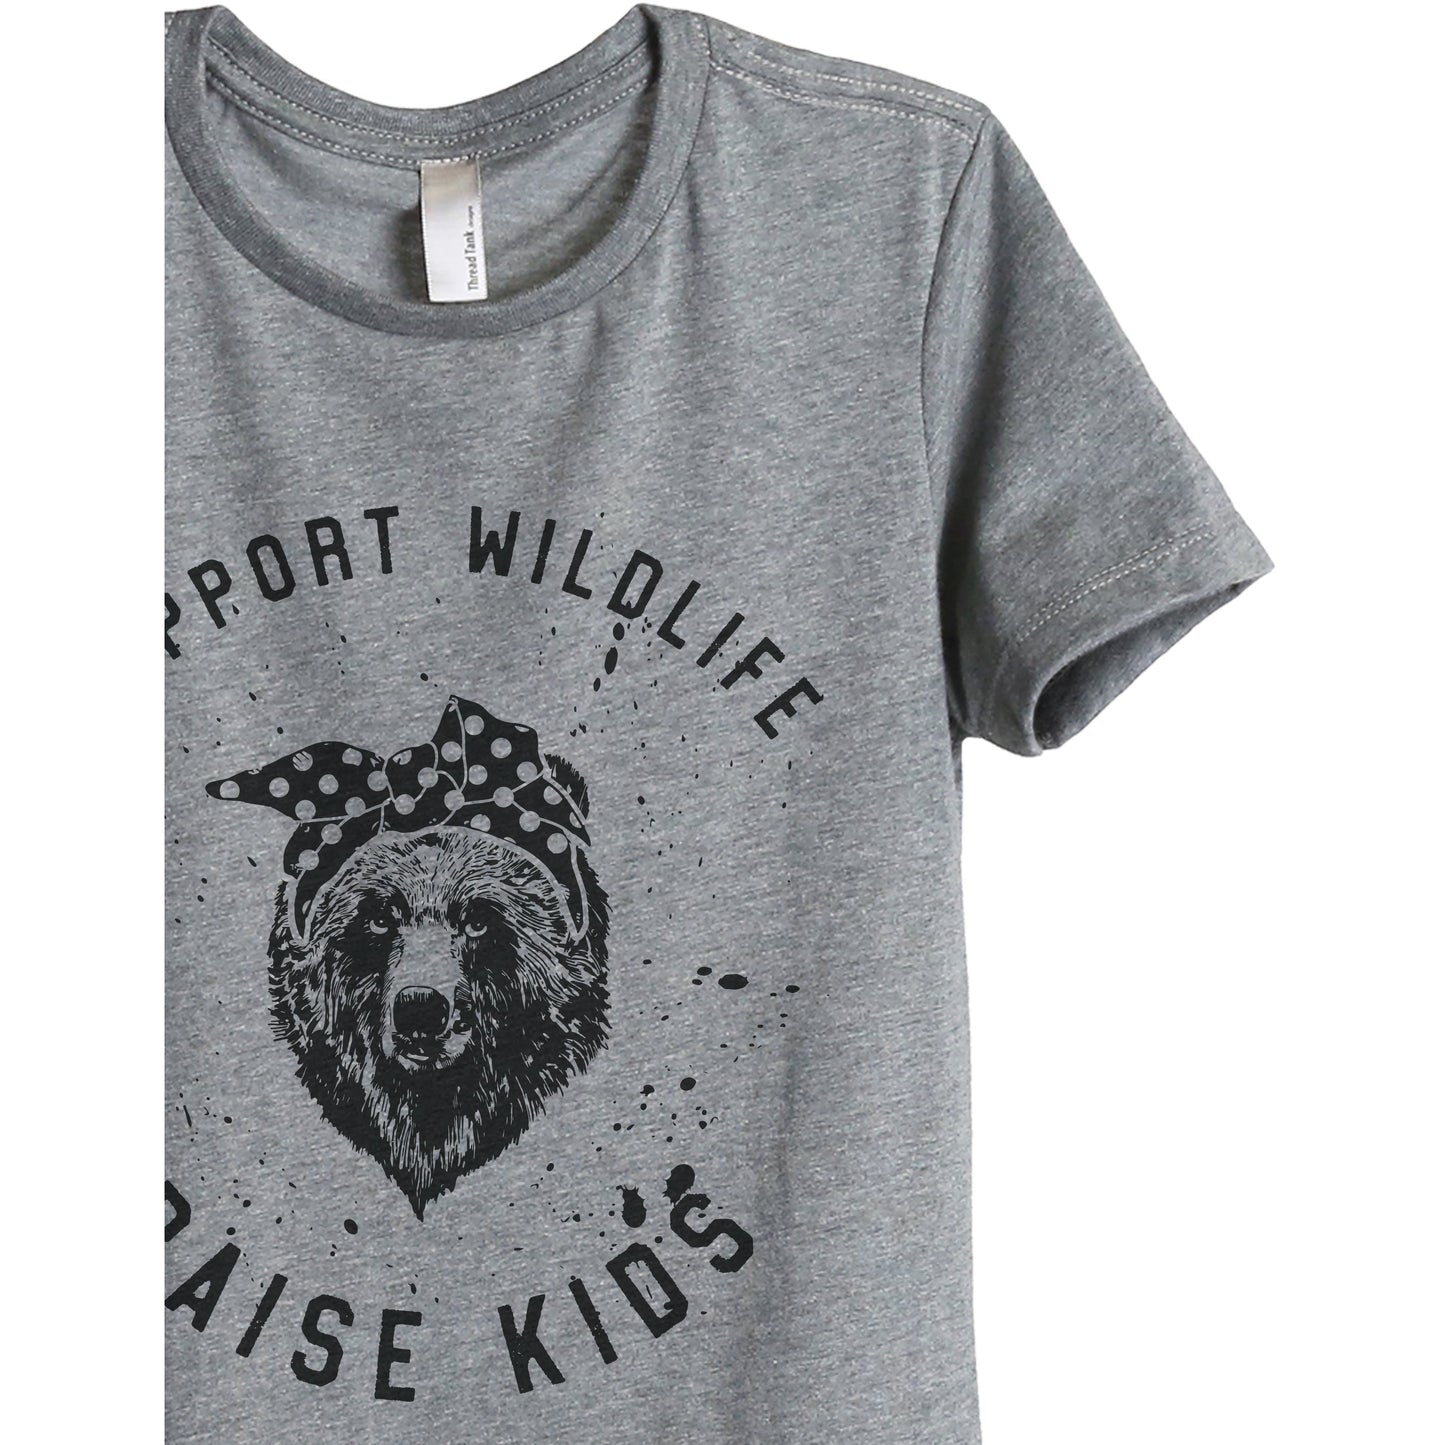 Support Wildlife Raise Kids - Stories You Can Wear